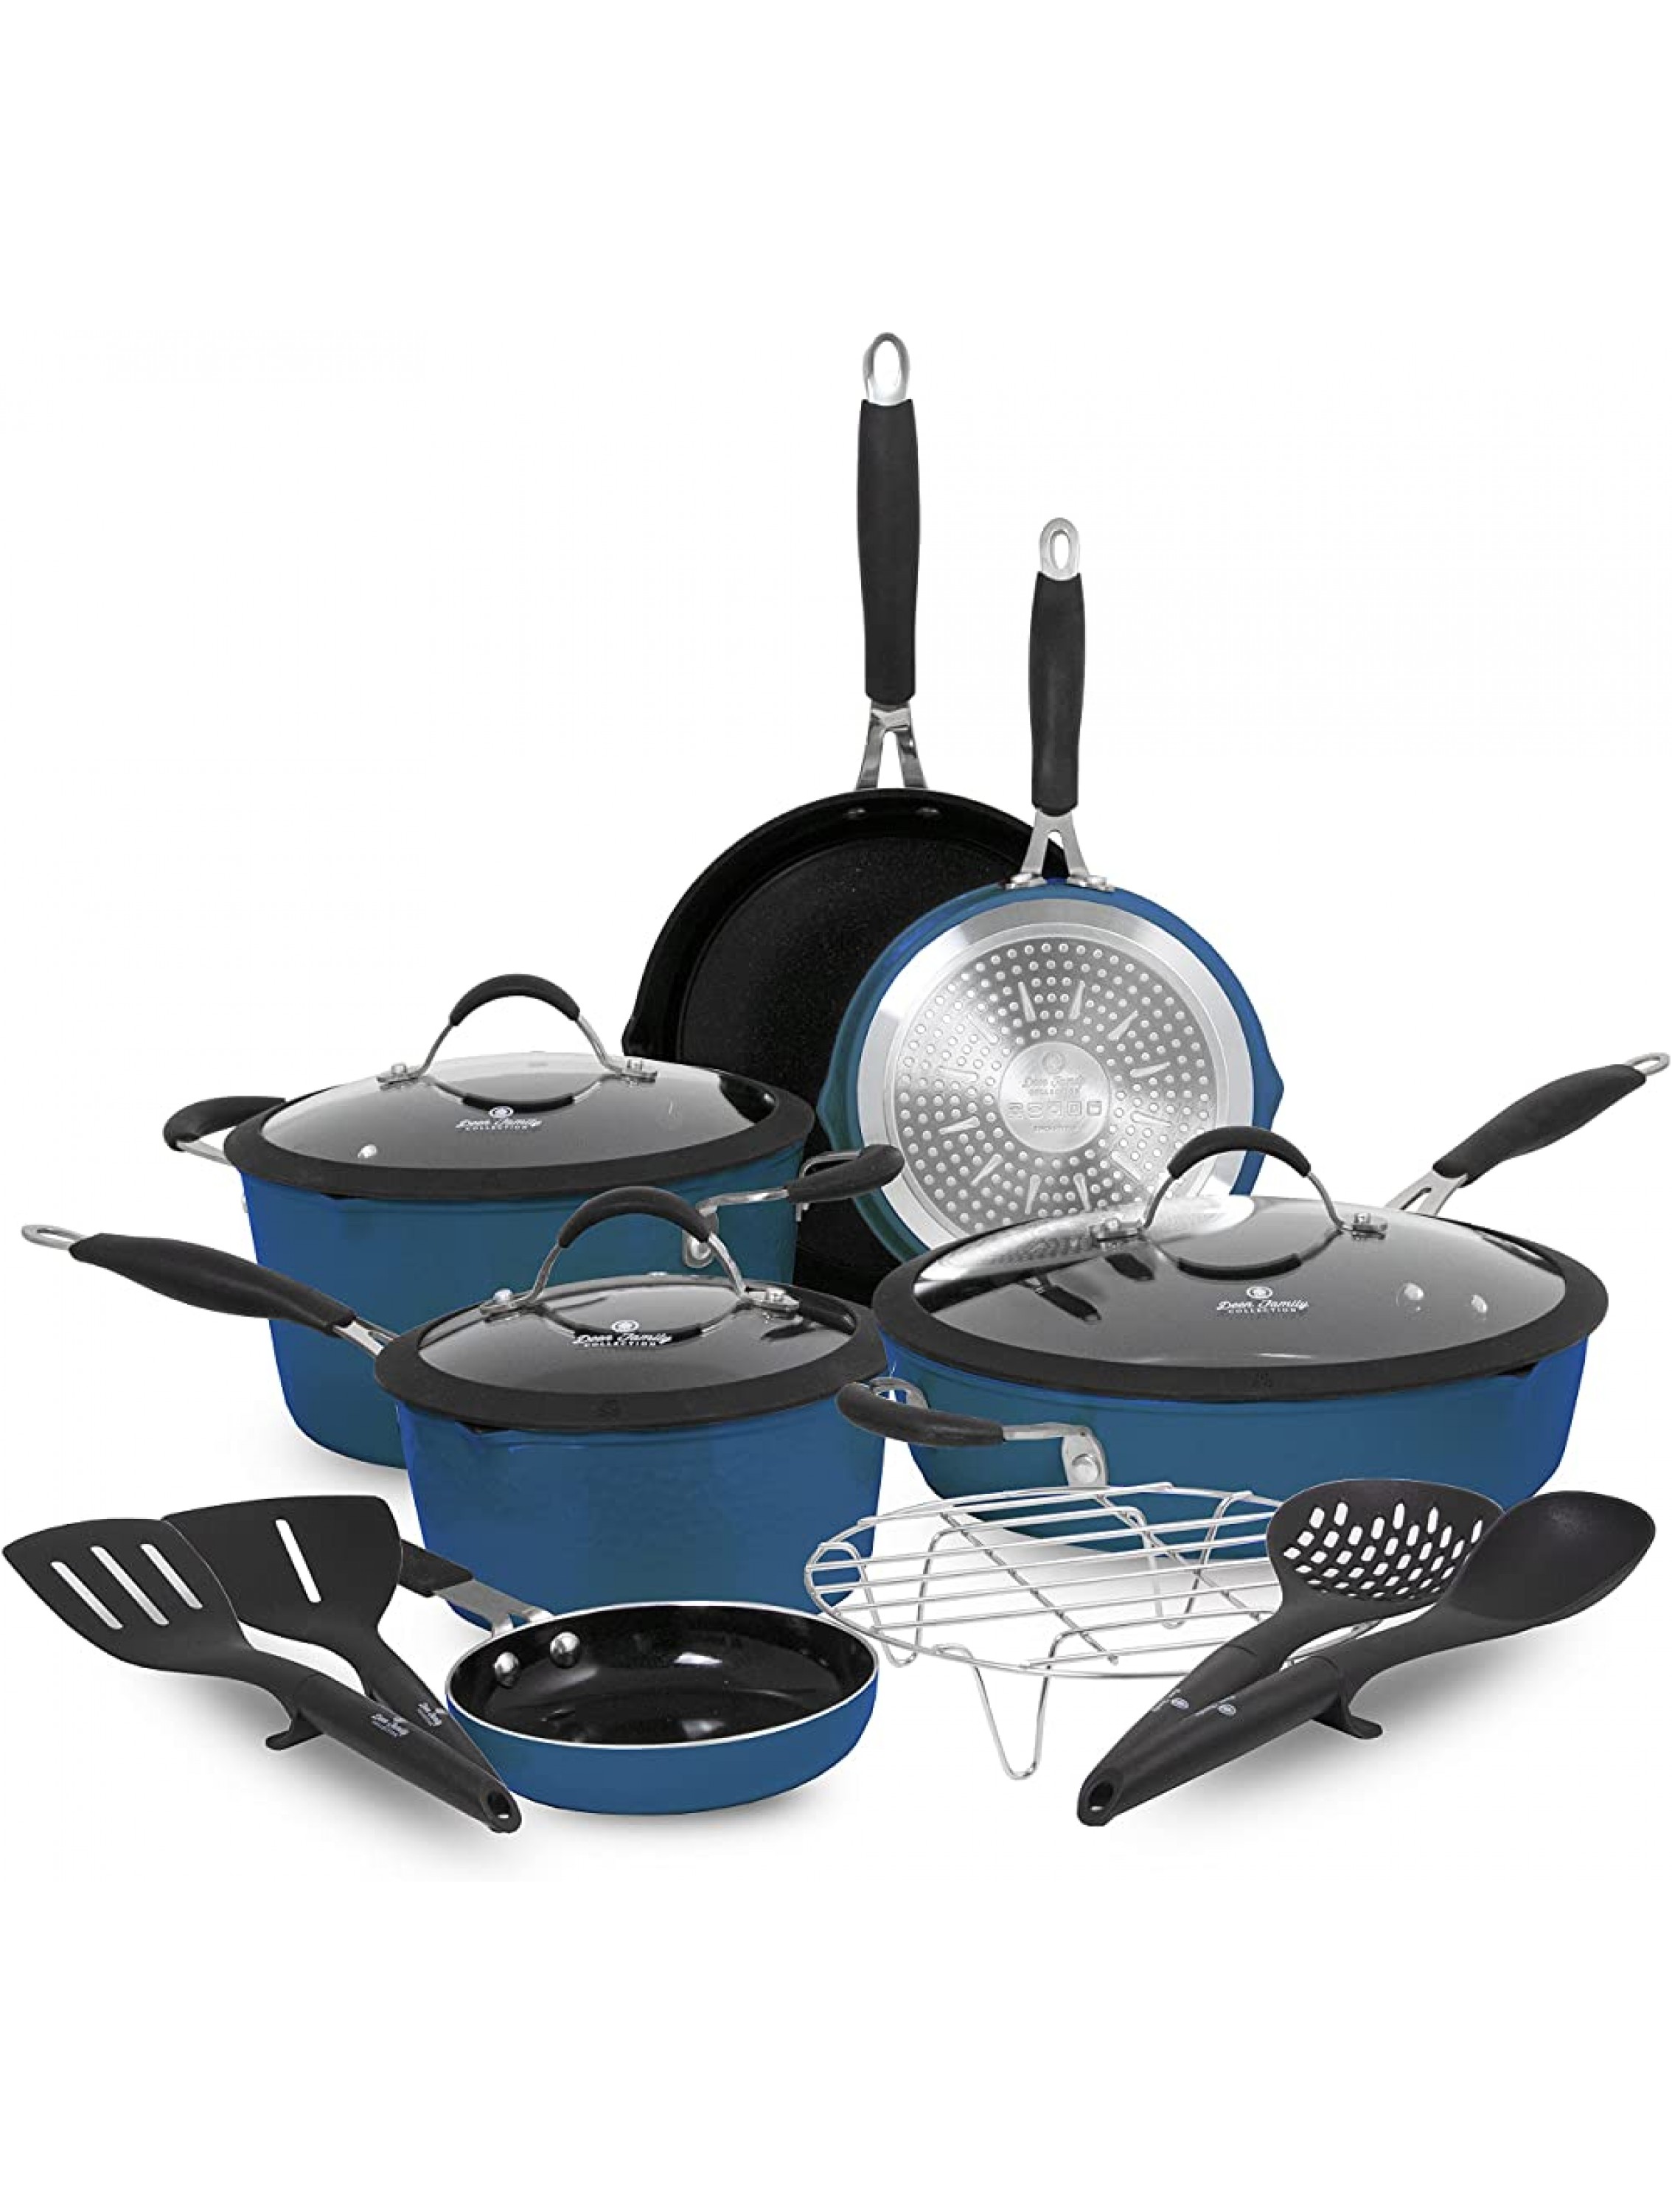 Paula Deen Family 14-Piece Ceramic Non-Stick Cookware Set 100% PFOA-Free and Induction Ready Features Stay-Cool Handles Dual Pour Spouts and Kitchen Tools Savannah Blue - BNII3G9R4